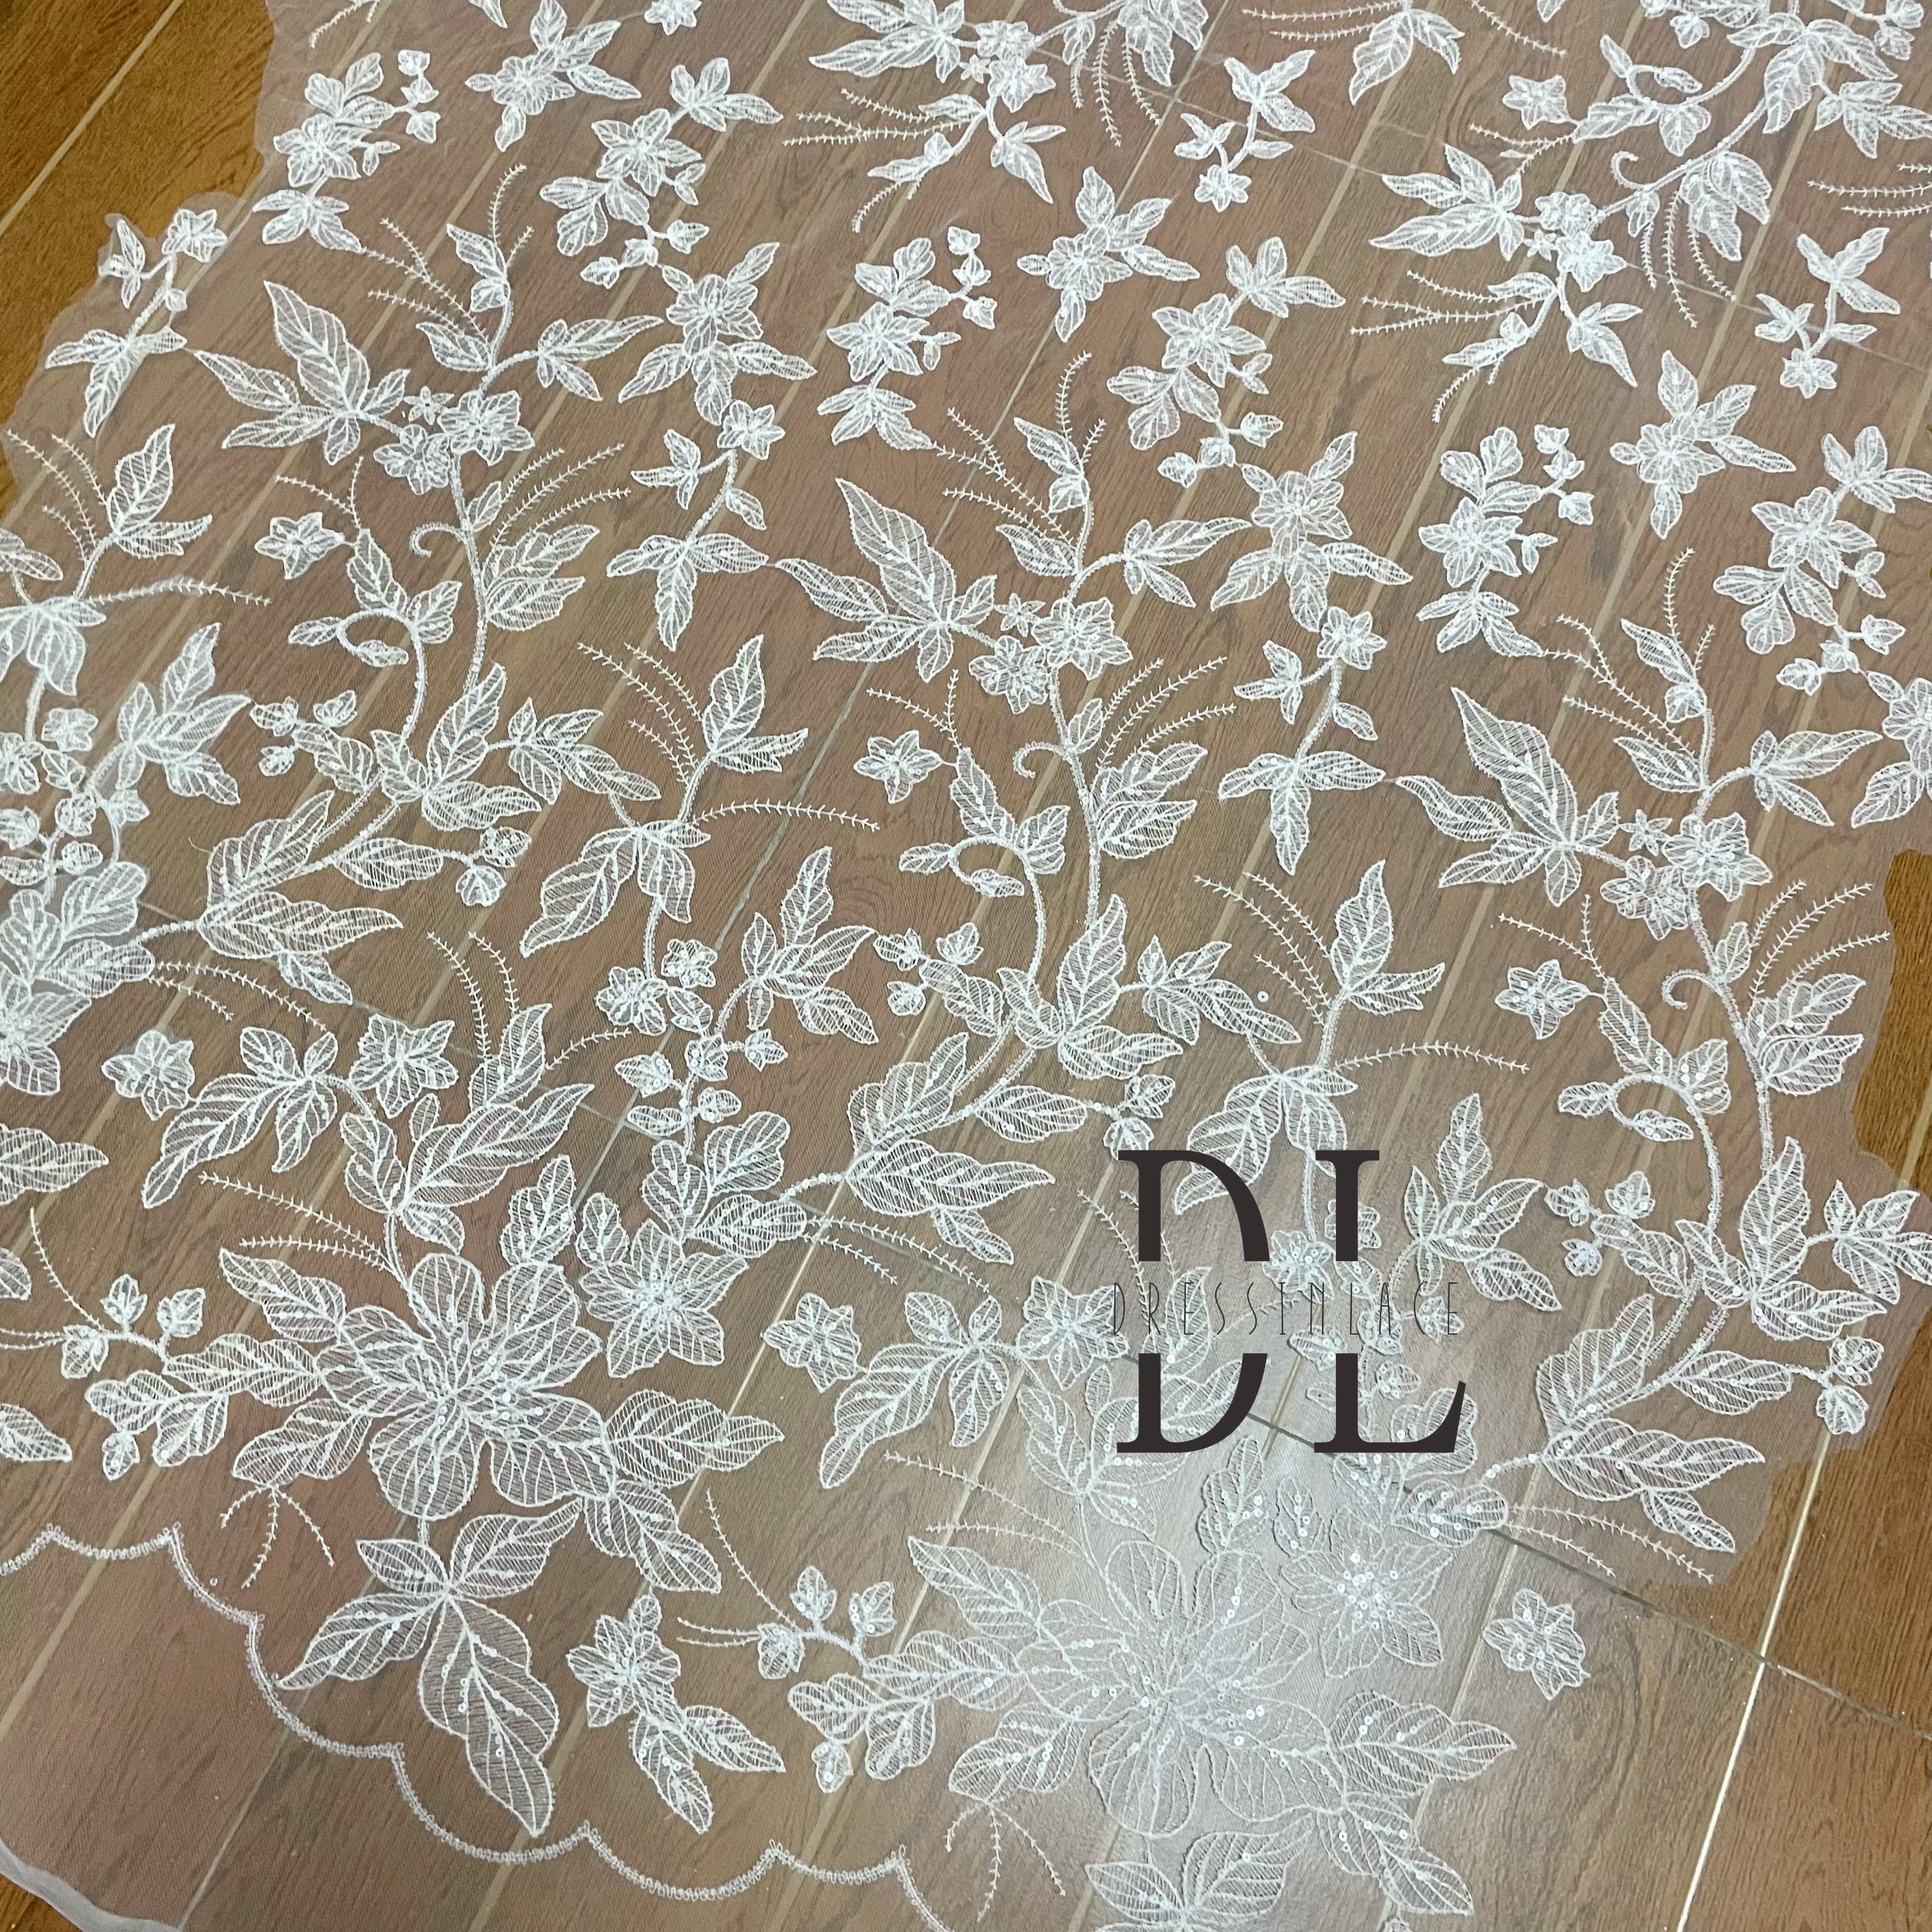 DL130155 Floral Delight Embroidery Lace Fabrics White Sequin - Soft Tulle | High Quality Lace Fabric Custom high-end dresses